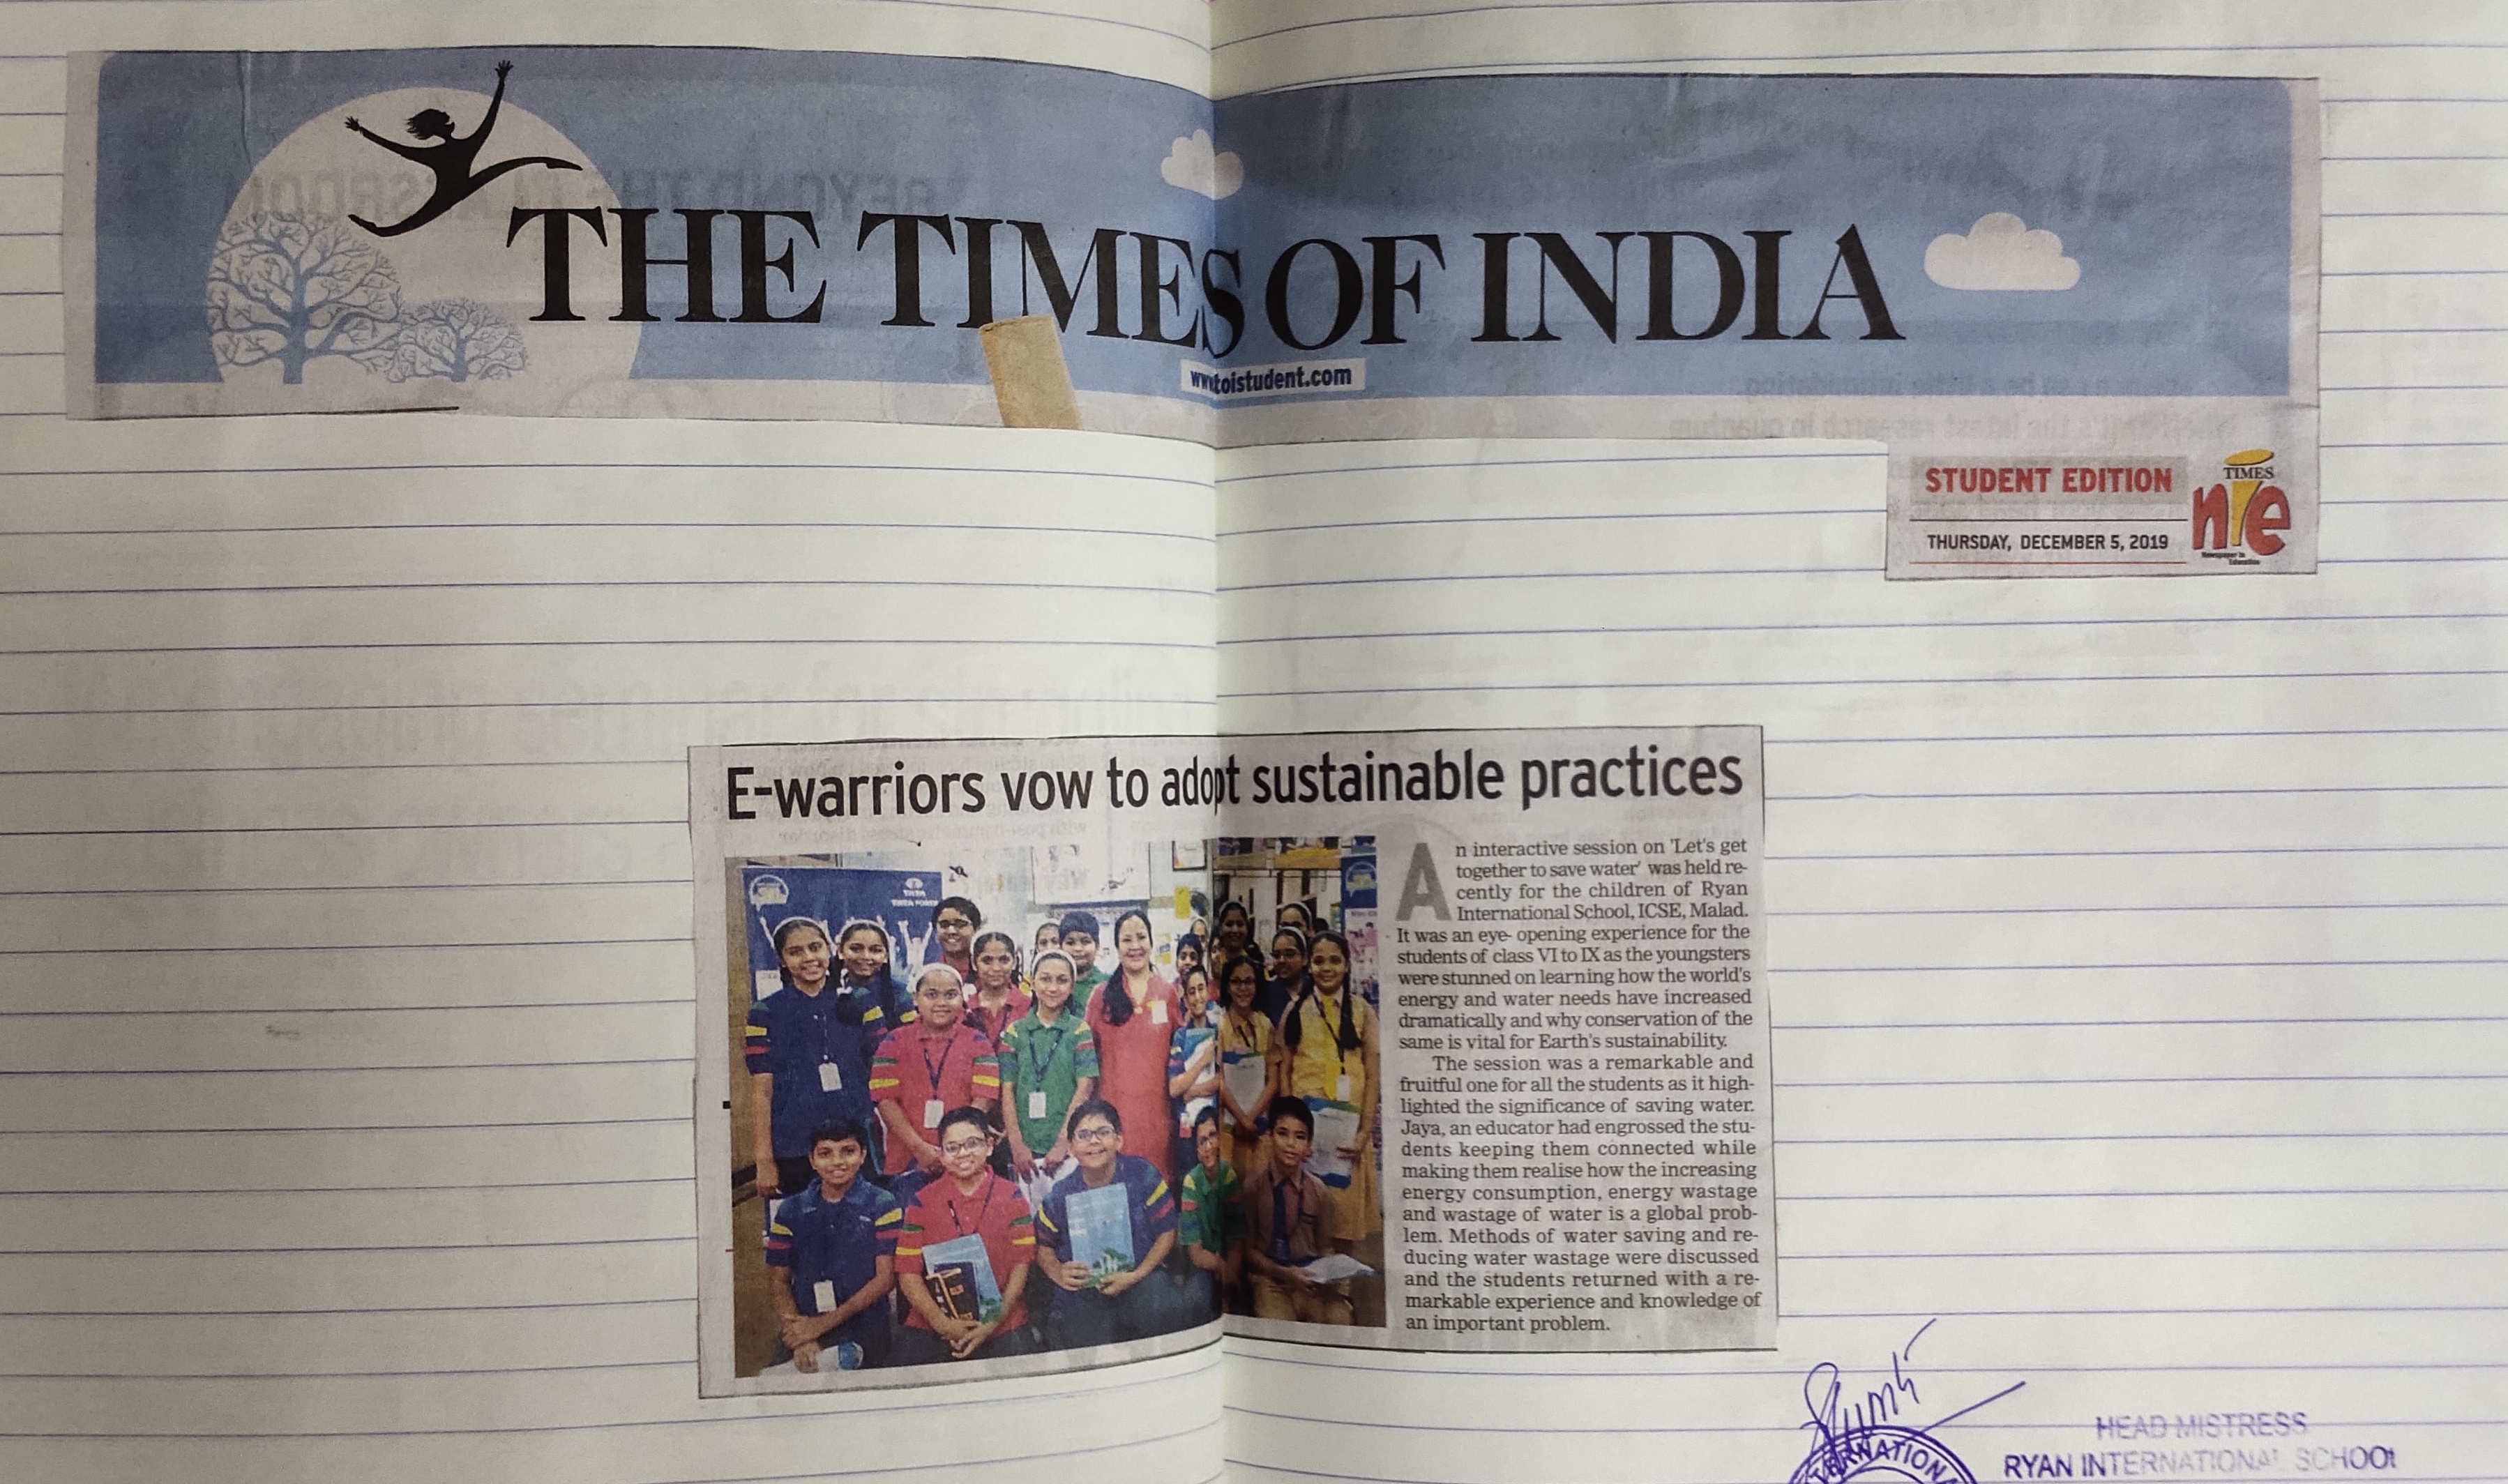 An article under the name “Interactive Session with Ms. Jaya Khare – Tata Power” was published in the Times of India